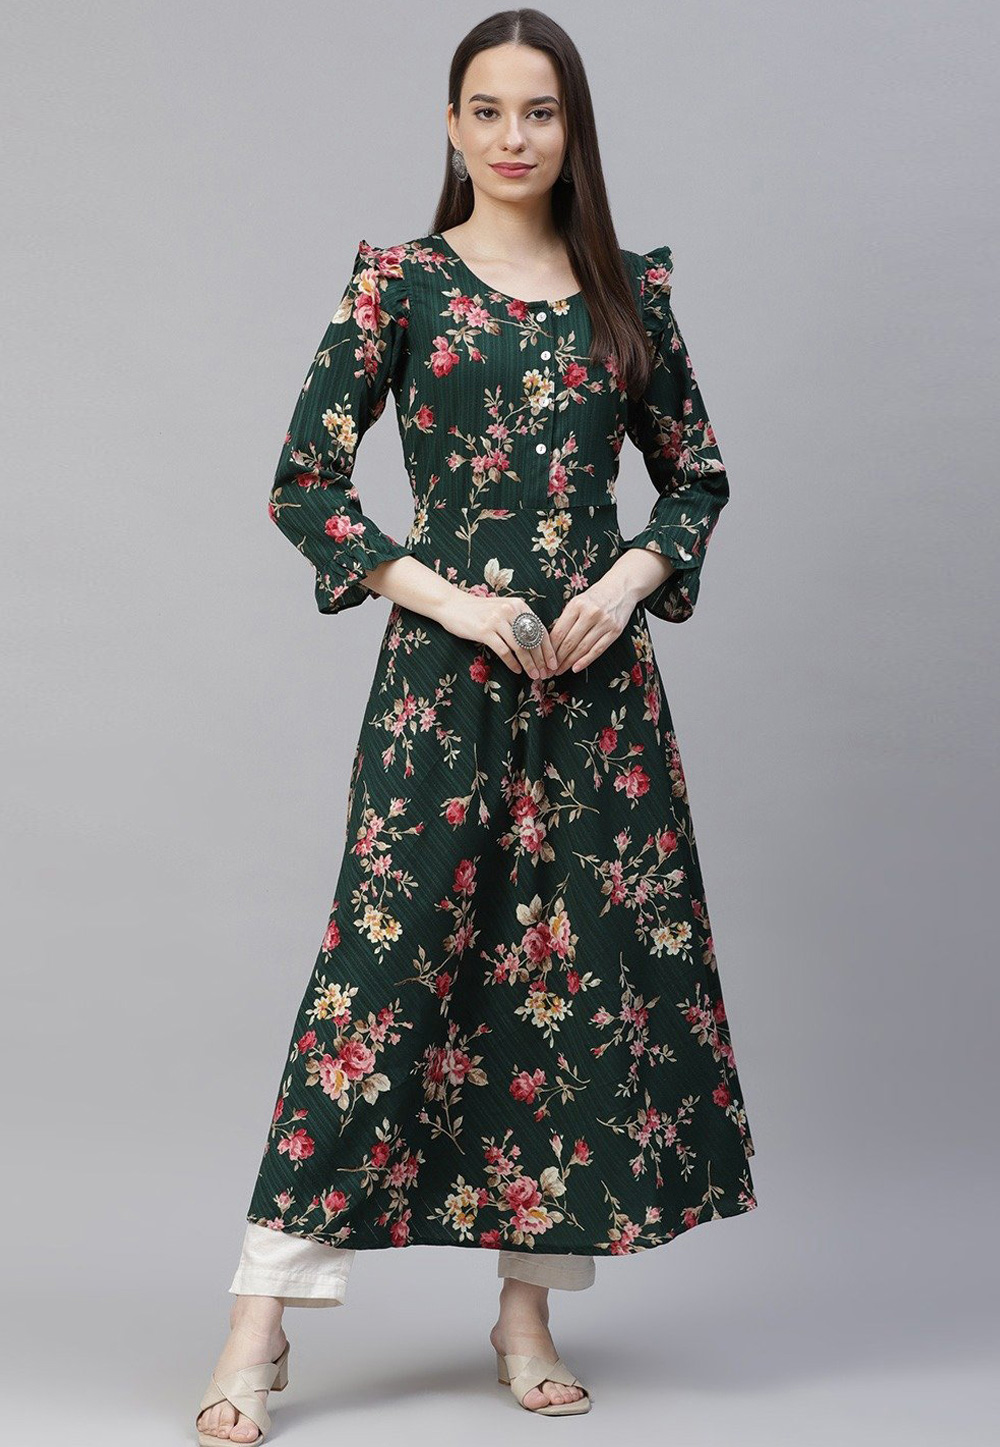 Green Polyester Floral Print Tunic 232940